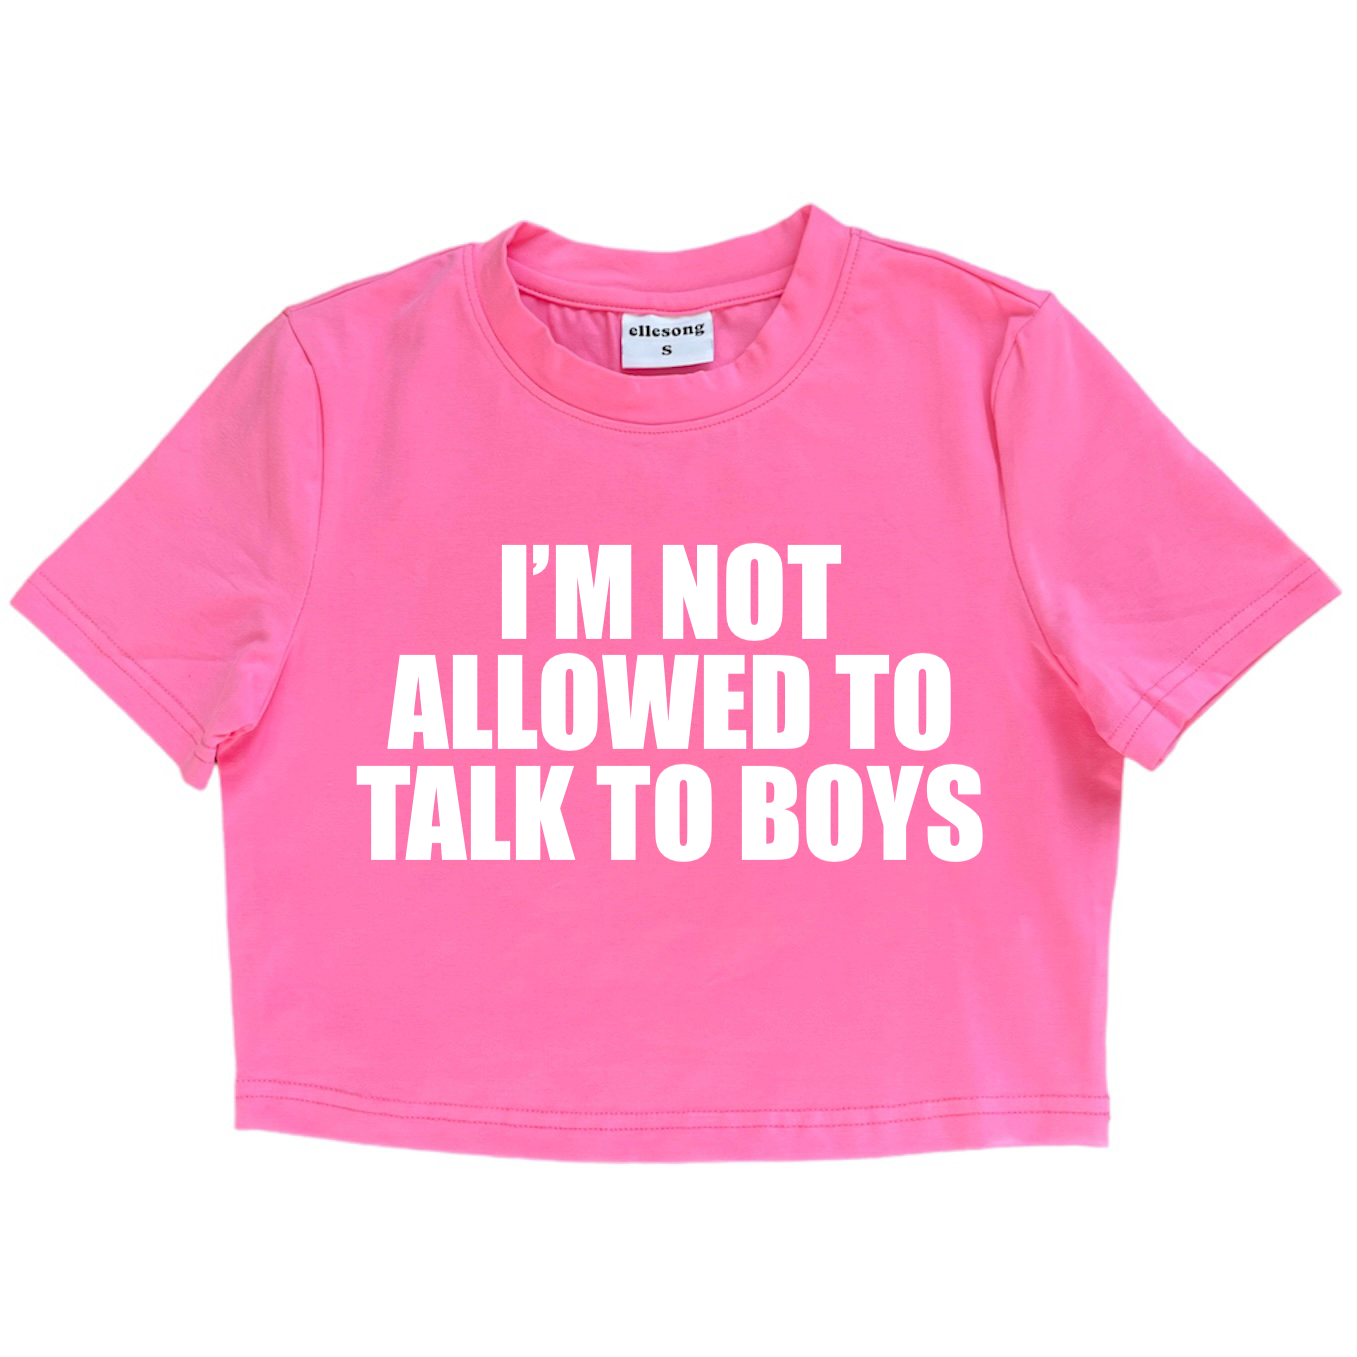 I’m Not Allowed To Talk To Boys Baby Tee